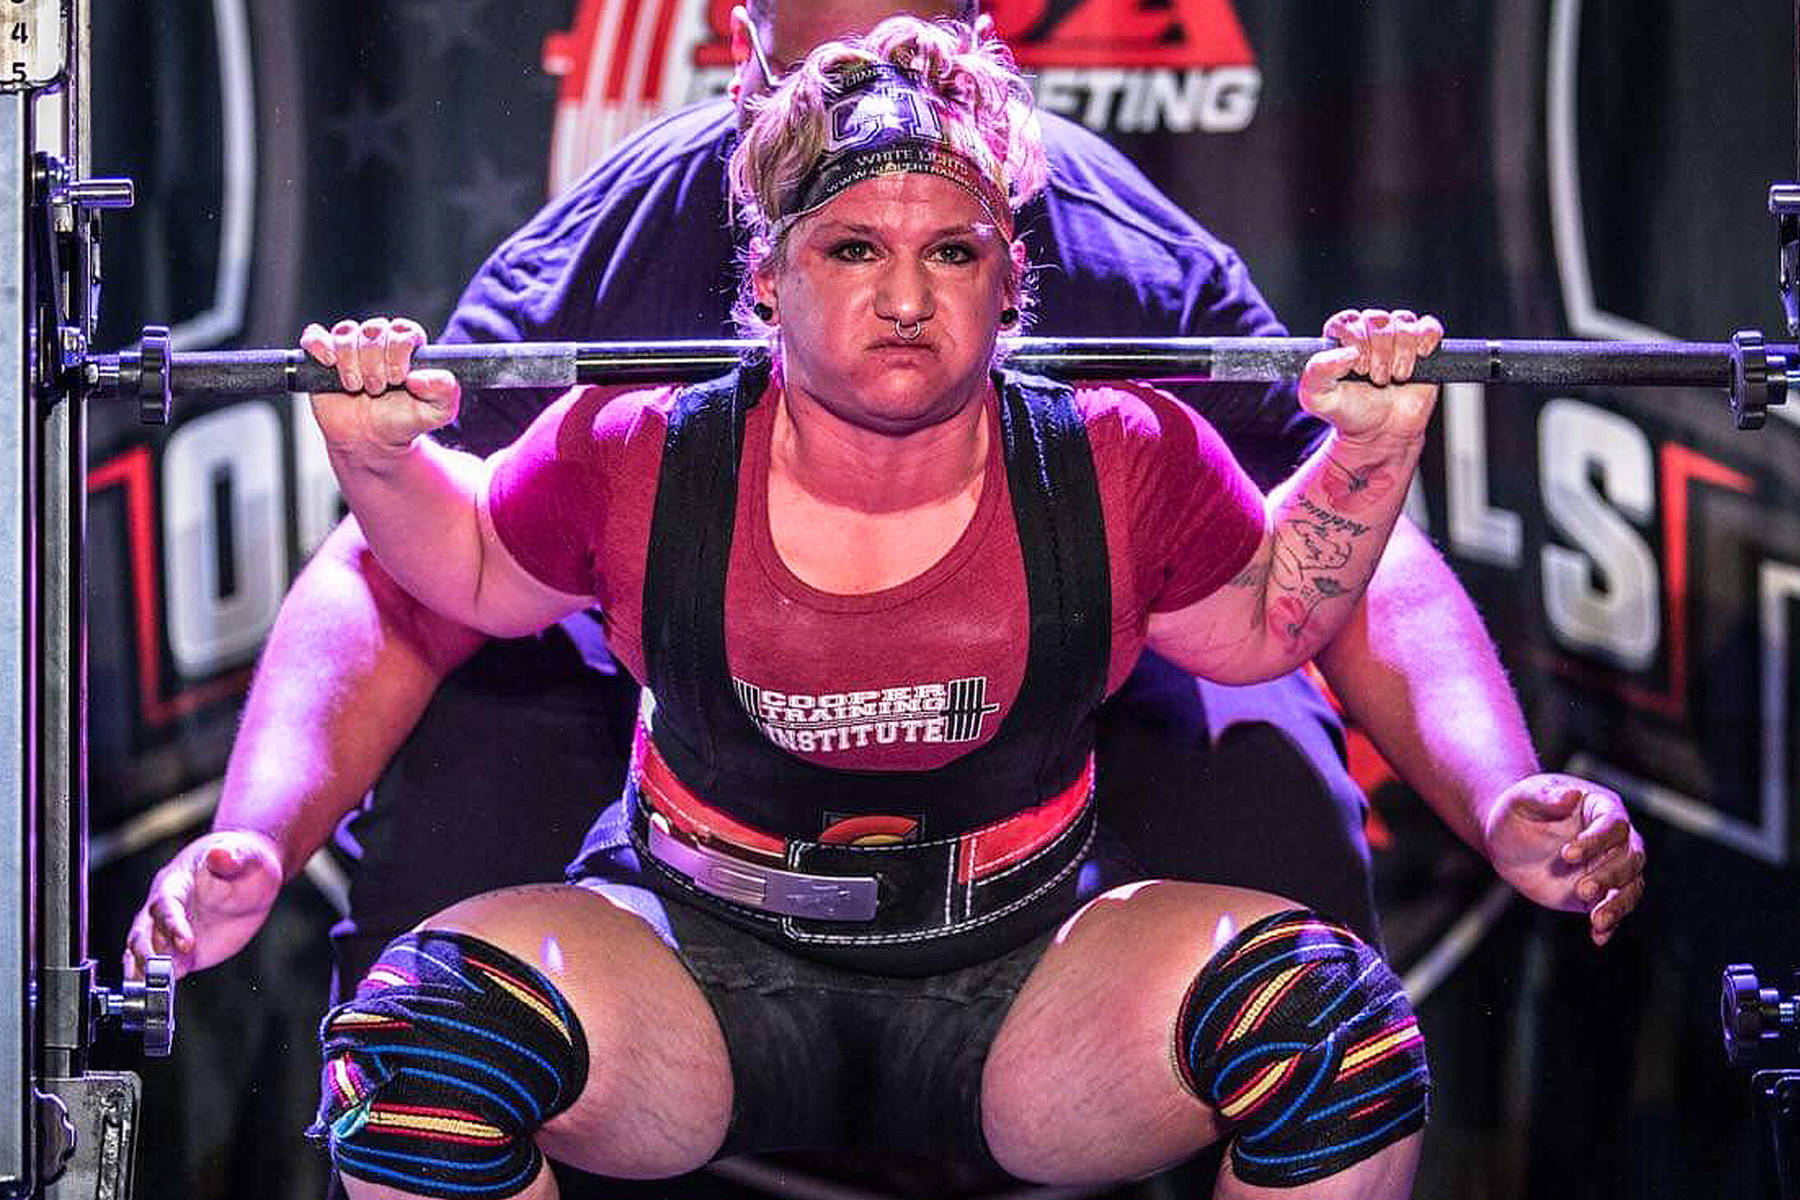 Nikiski powerlifter reaches new highs with Team USA invite